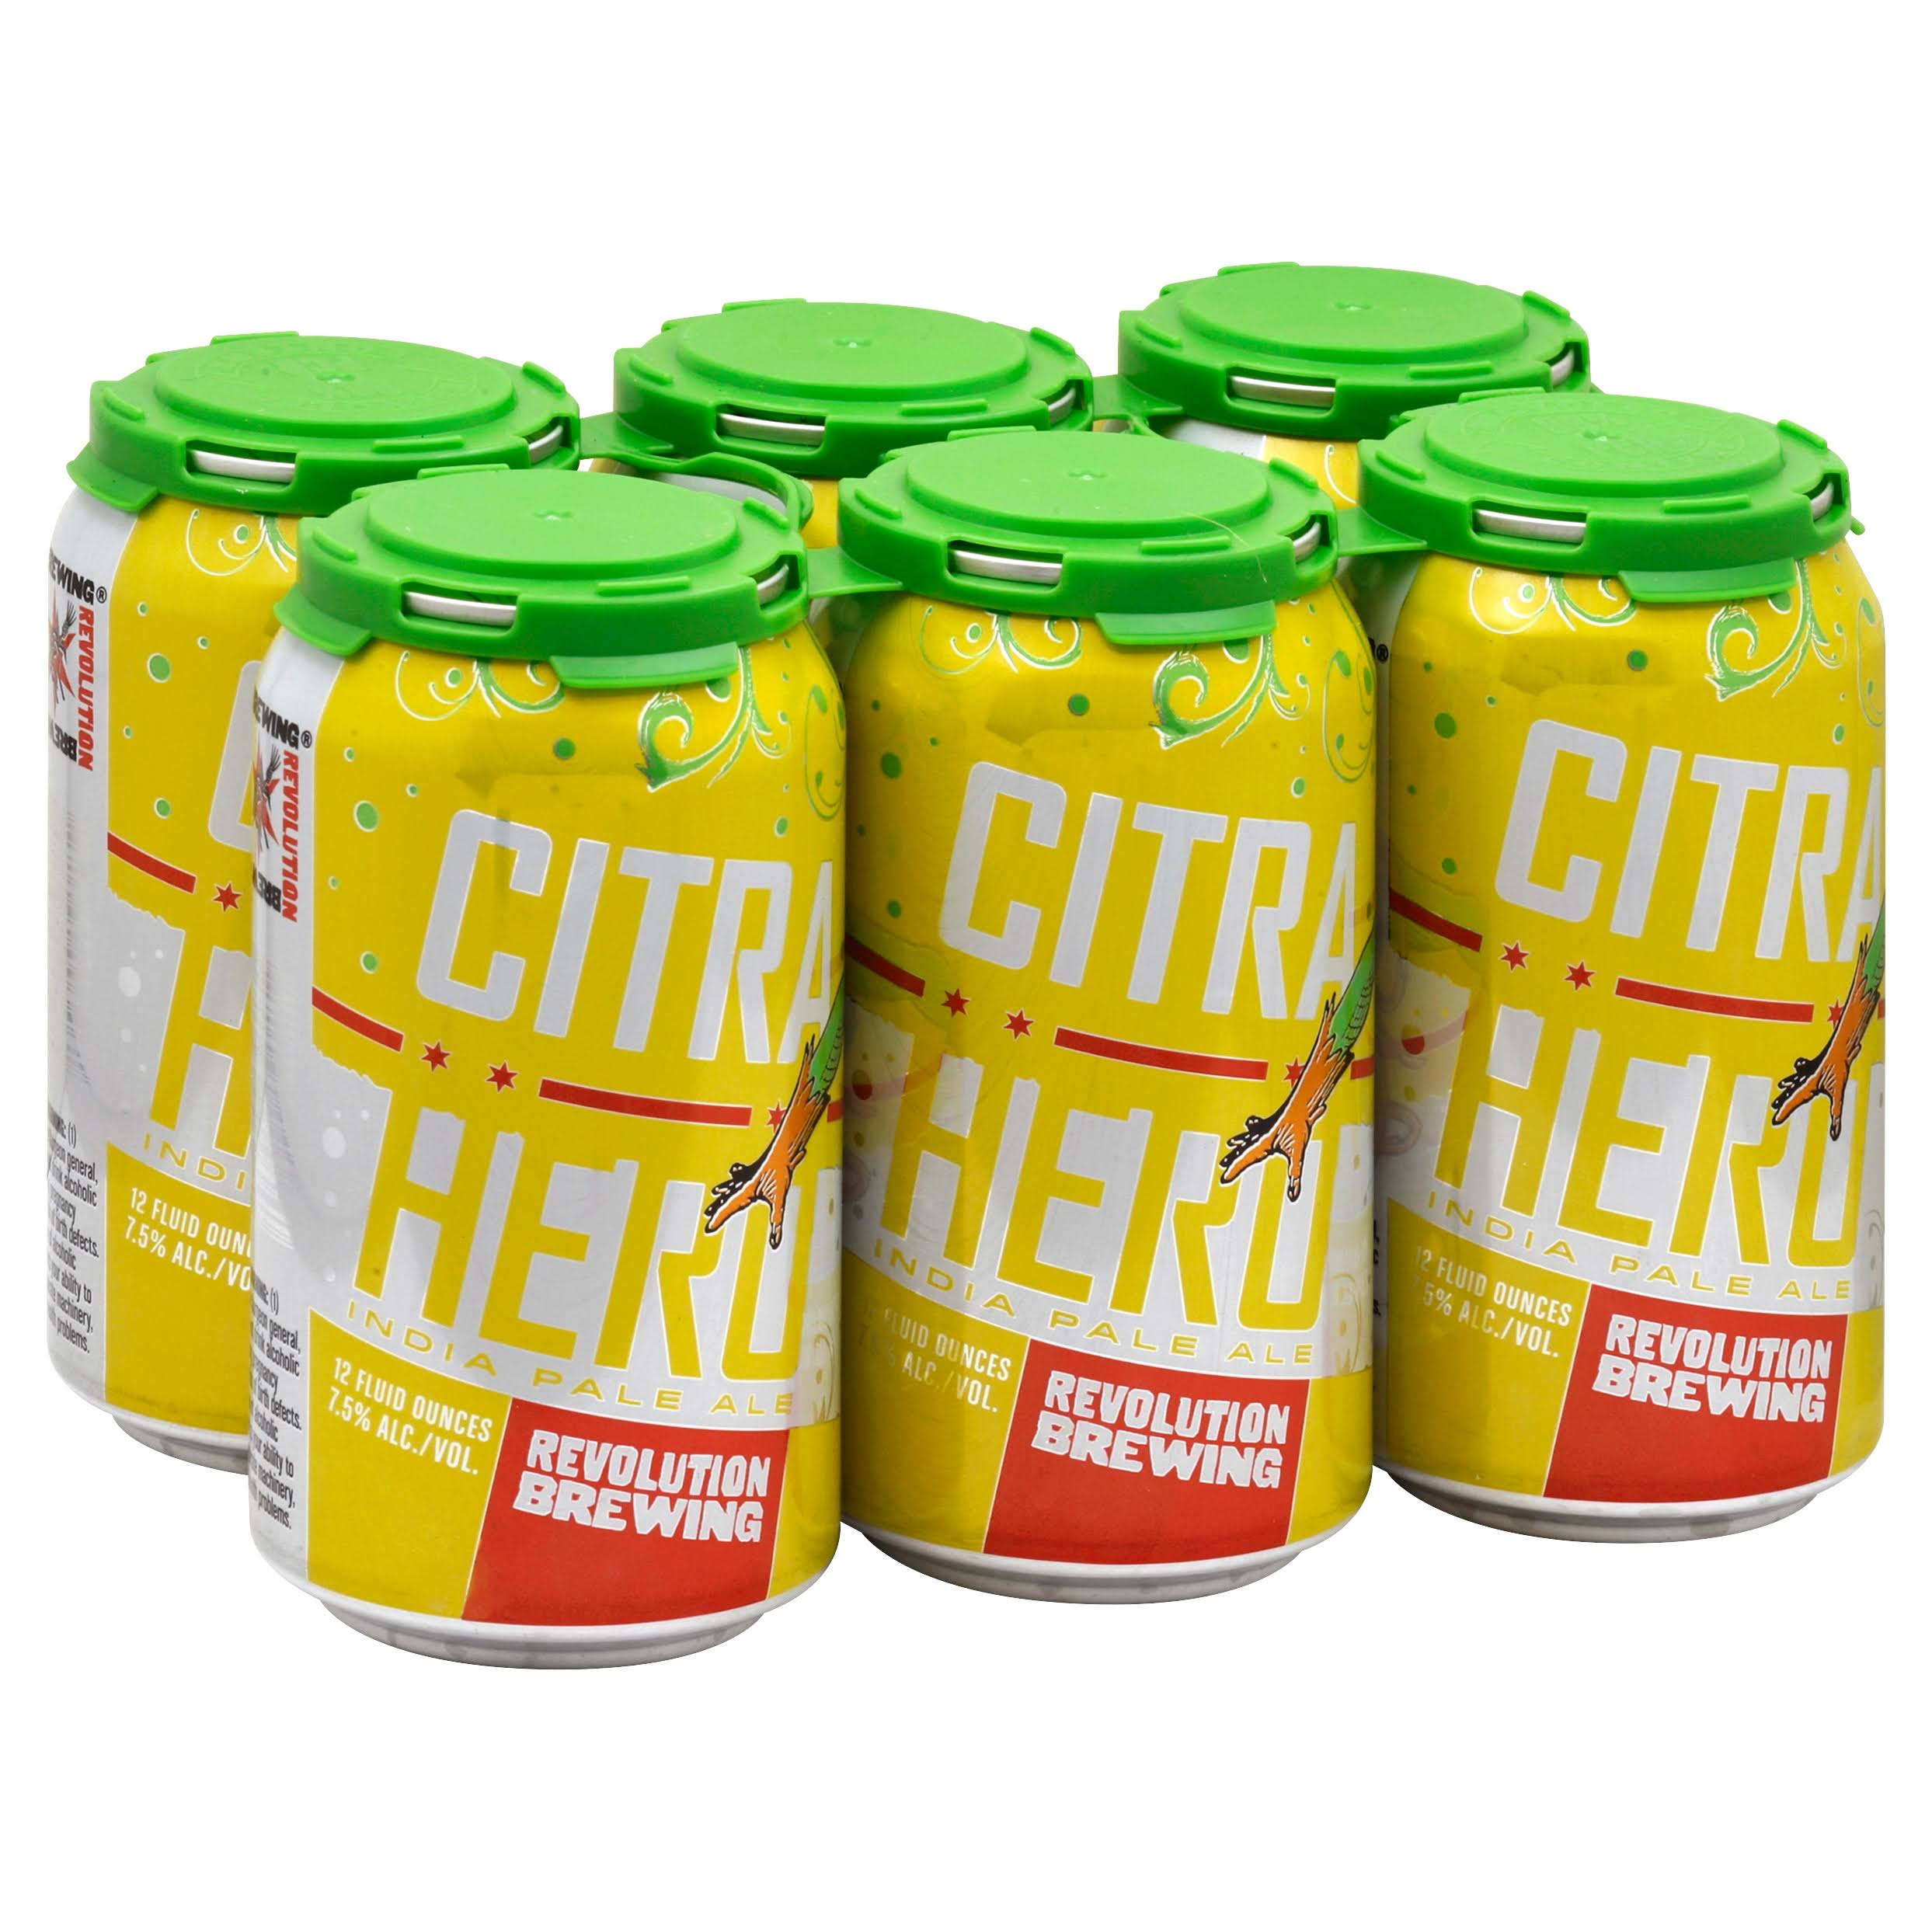 Revolution Brewing Beer, India Pale Ale, Citra Hero - 6 - 12 fluid ounce cans